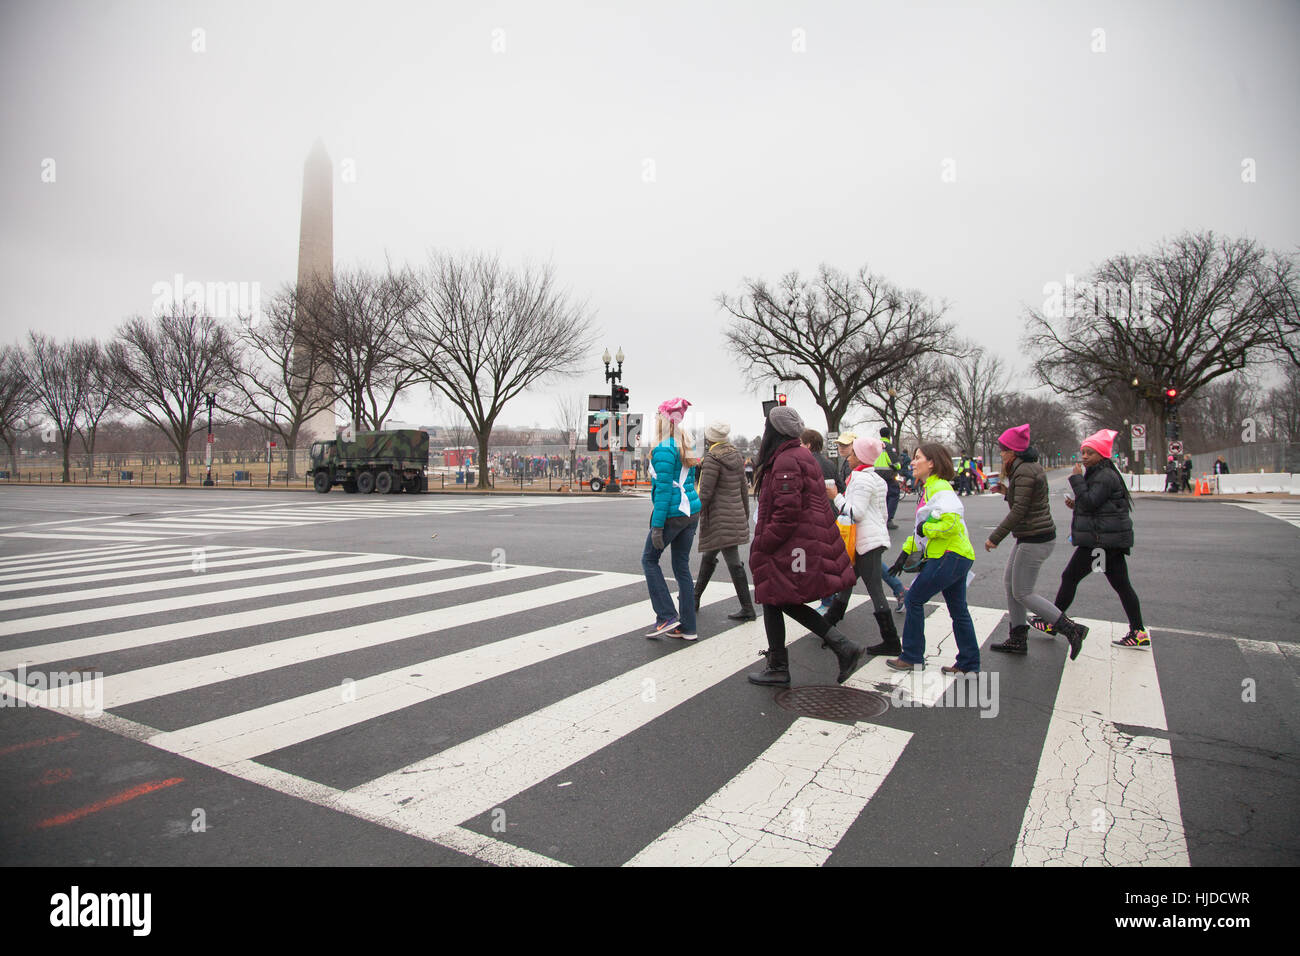 Washington, USA. January 21st, 2017. Women's March on Washington, DC: Group of women crossing the street on Constitution Avenue with the Washington Monument bathed in fog in the background to make their way to the rally to protest President Trump's positions on women's and other human rights. Credit: Dasha Rosato/Alamy Live News Stock Photo